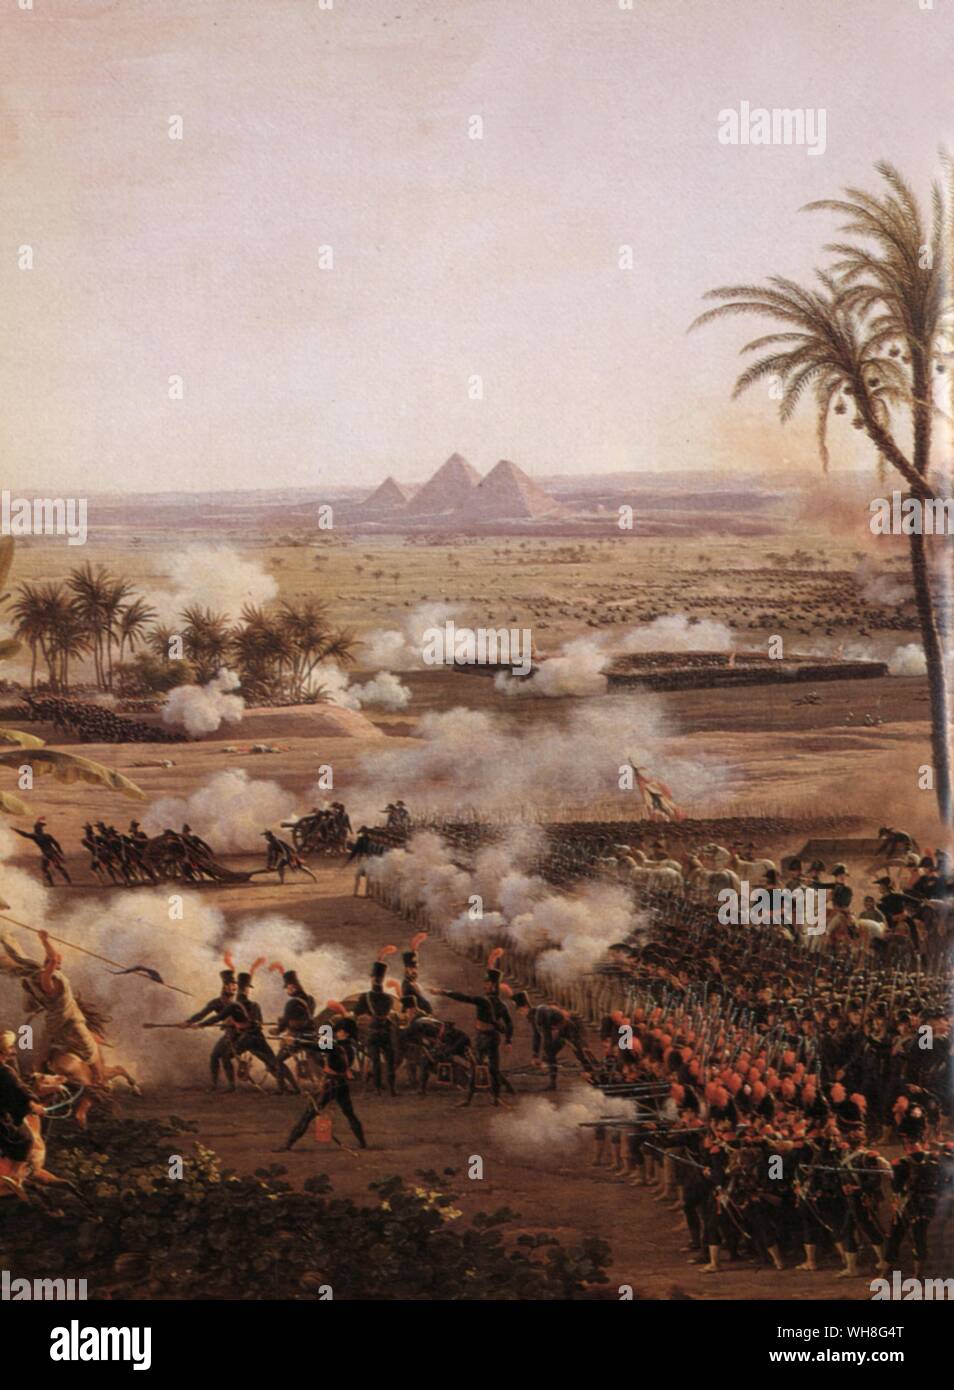 Battle of the Pyramids, 21 July 1798, when the French army, deployed in divisional squares, routed the Mameluke horsemen. Painting by Louis-François, baron Lejeune (1775-1848), a French general, painter, and lithographer.. Napolean's first major battle against the Mamelukes, there was a clash between a modern European Army and a medieval Middle Eastern Army. The French losses amounted to about 300 while estimated Egyptian losses were around 4,000 - 6,000. Bonaparte by Correlli Barnet, page 65. Stock Photo